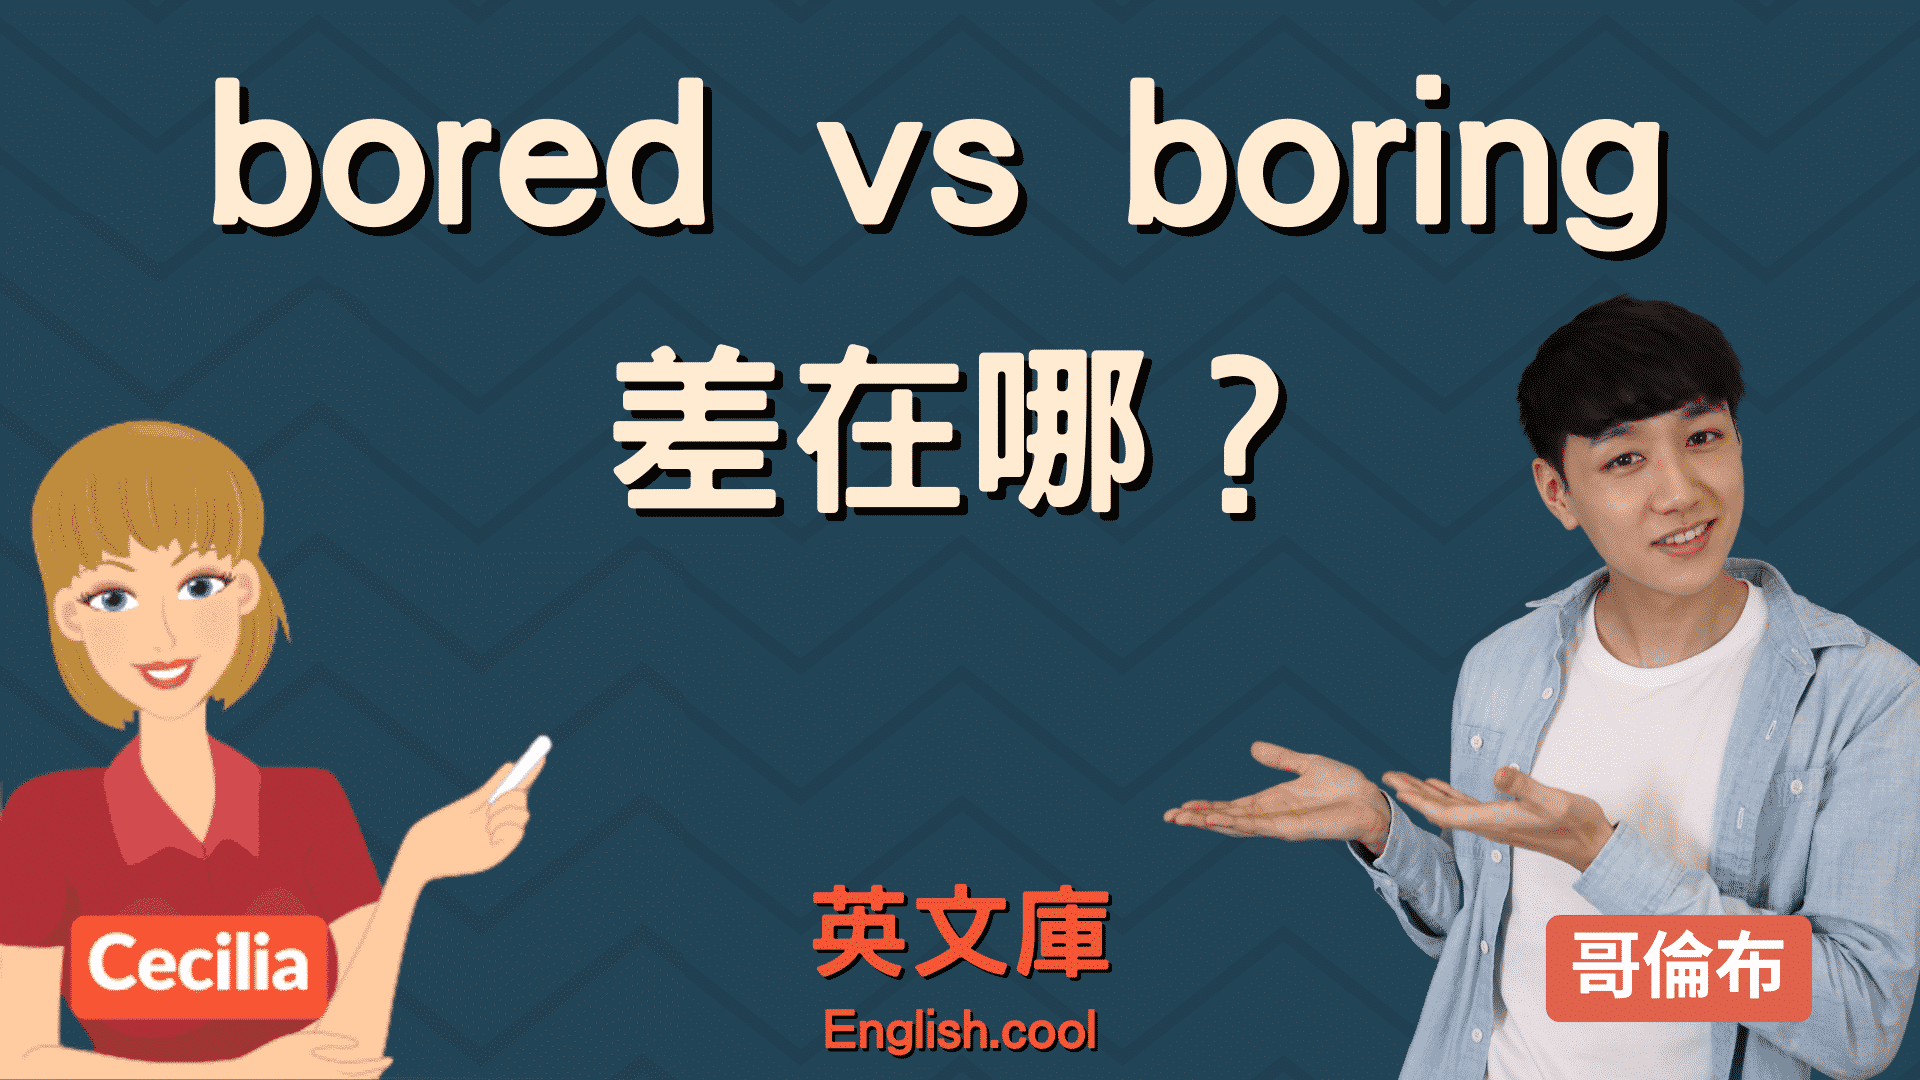 You are currently viewing bored VS boring? 來搞懂「情緒動詞」ed 尾與 ing 尾！